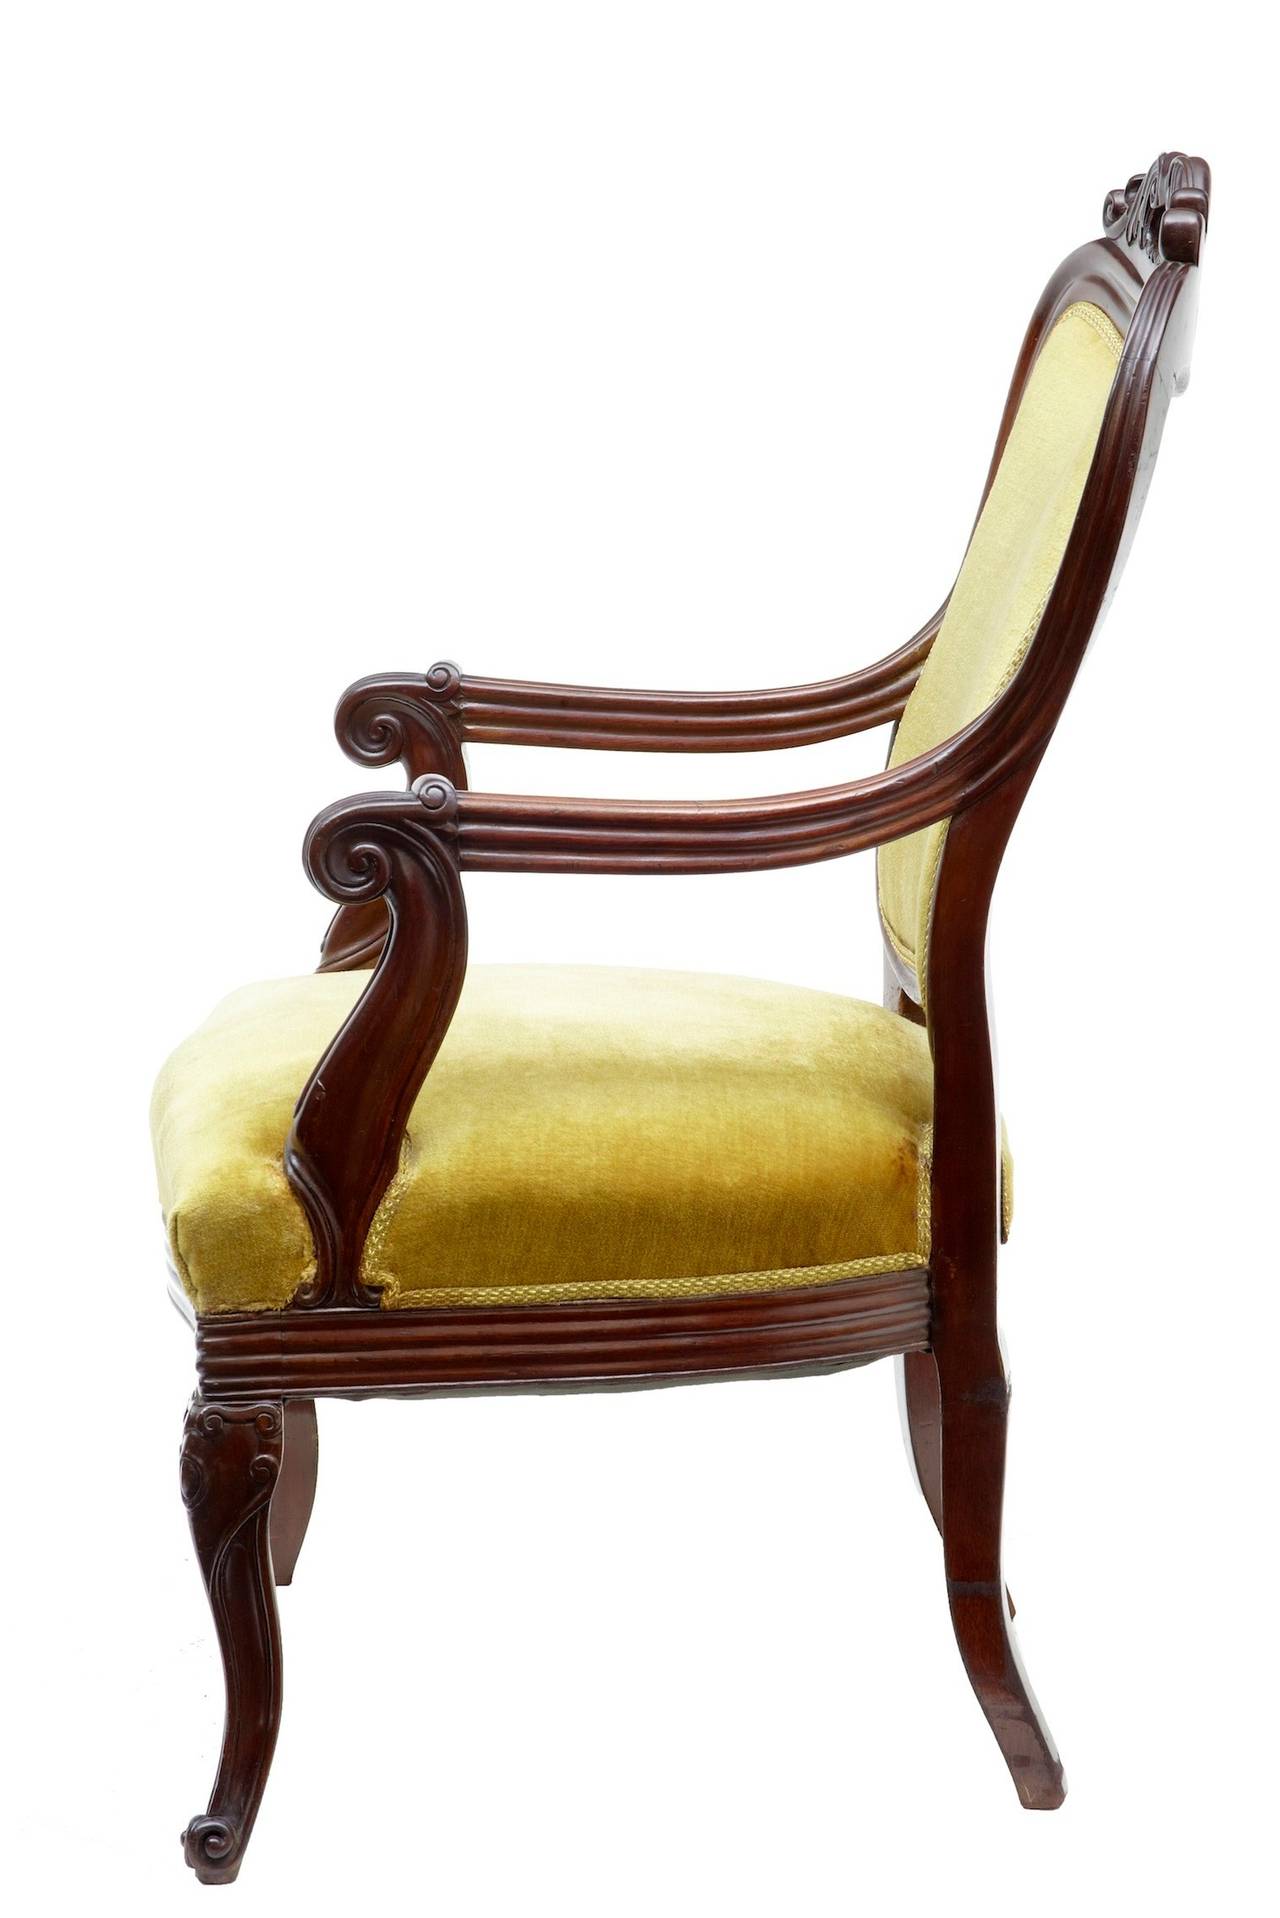 Carved mahogany armchair, circa 1840 

Carved back with open handle area, scroll arms. 

Measures: Height 39